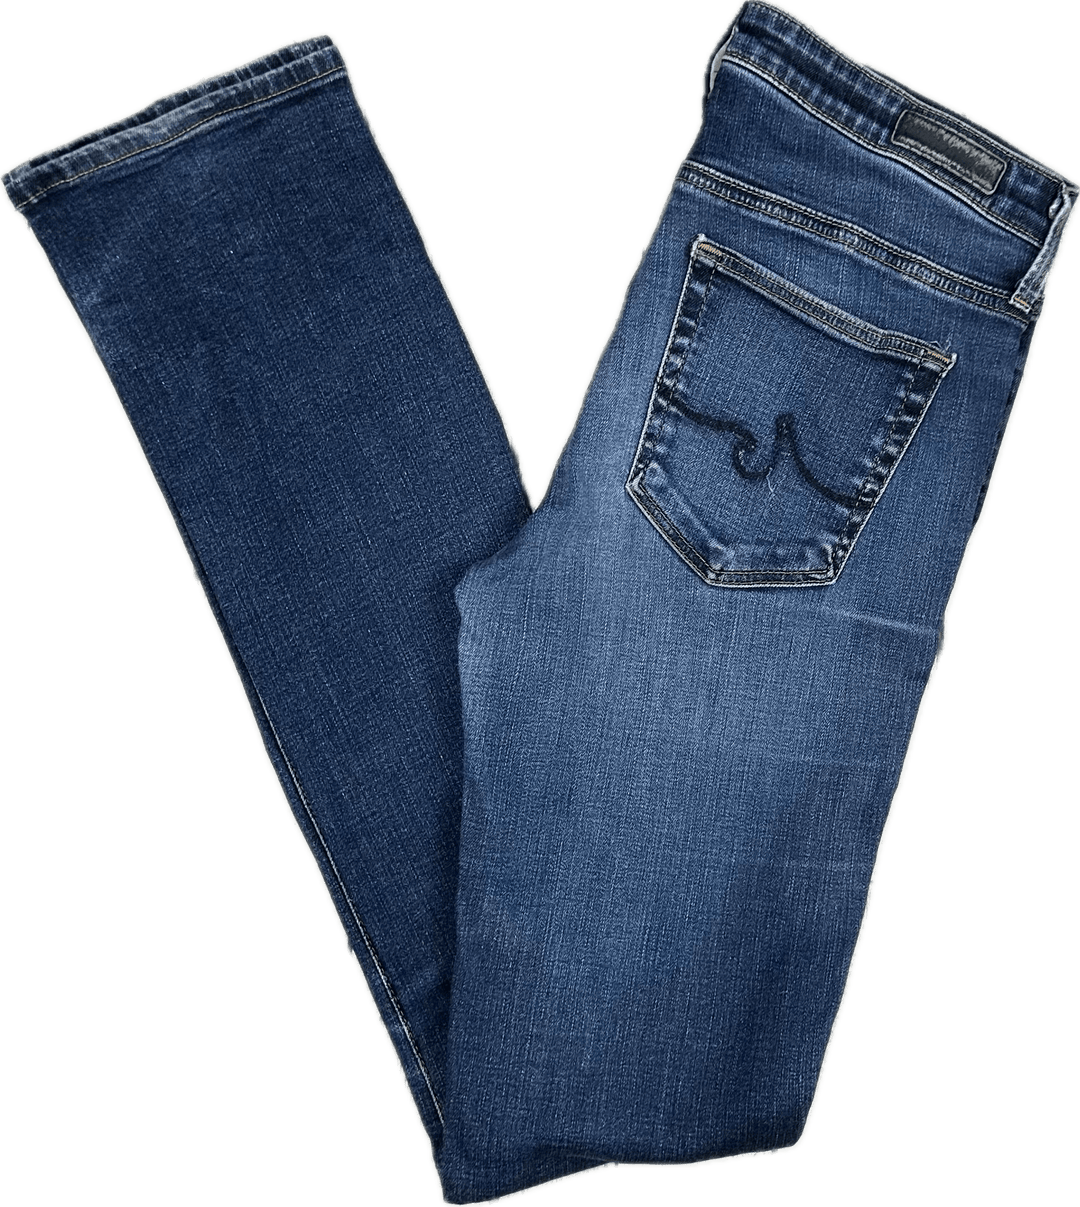 7 for all Mankind 'Gwenevere' Jeans in Vintage Wash - Size 24 - Jean Pool